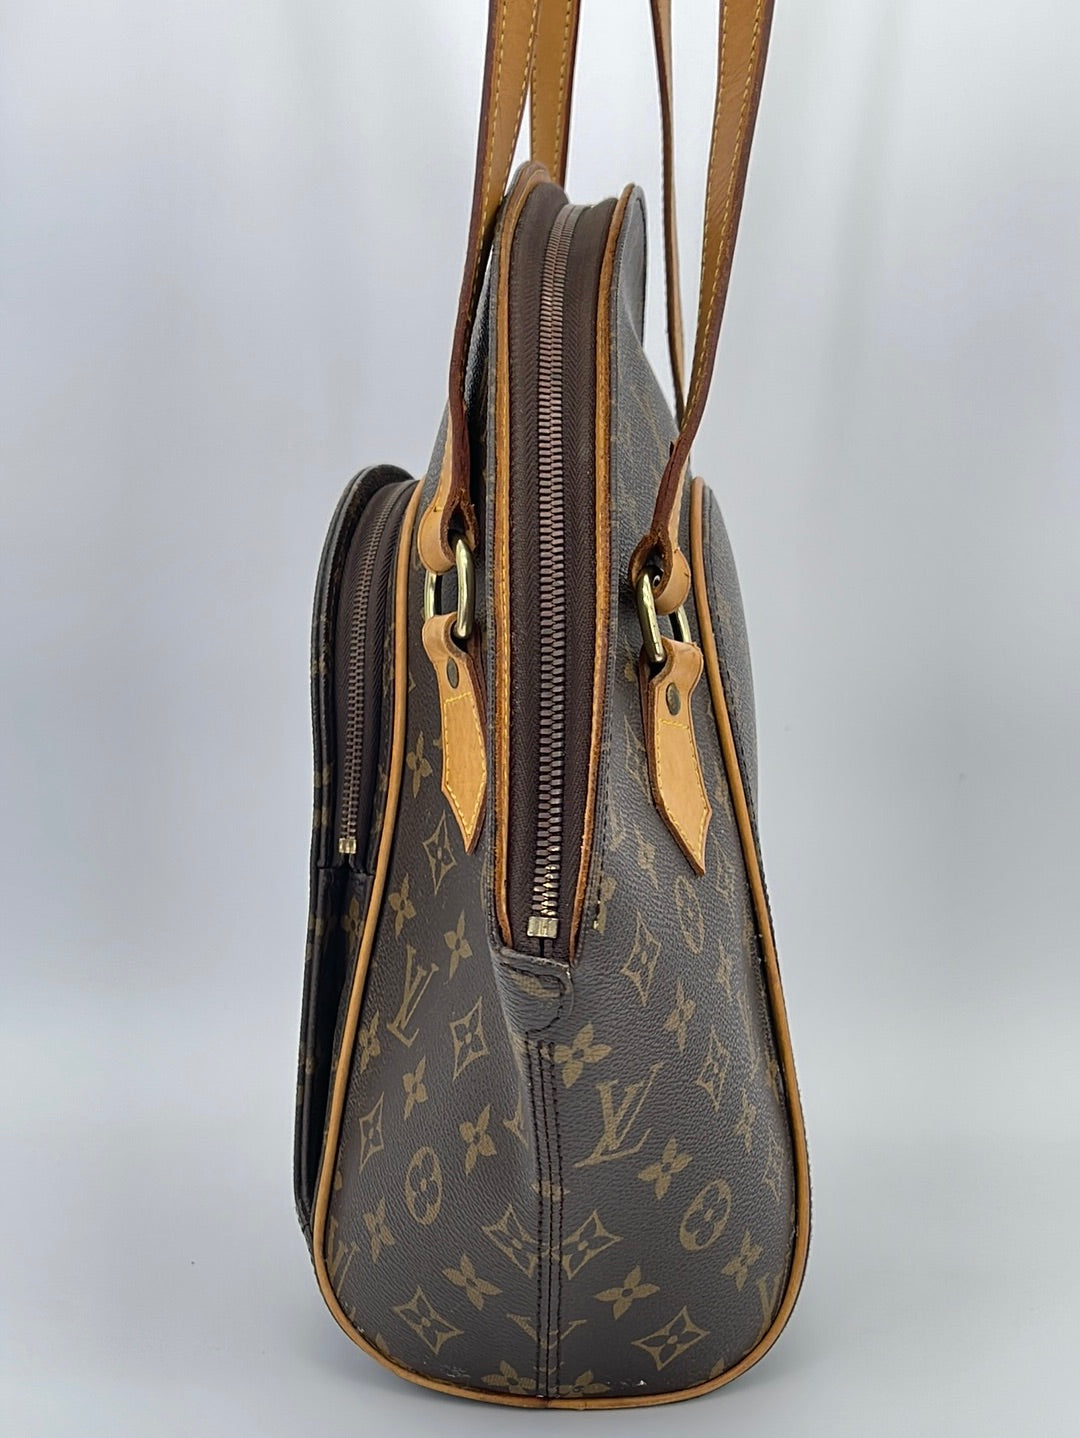 Sold at Auction: Louis Vuitton Ellipse PM bag in monogram. Retailed for  approximately $1125.